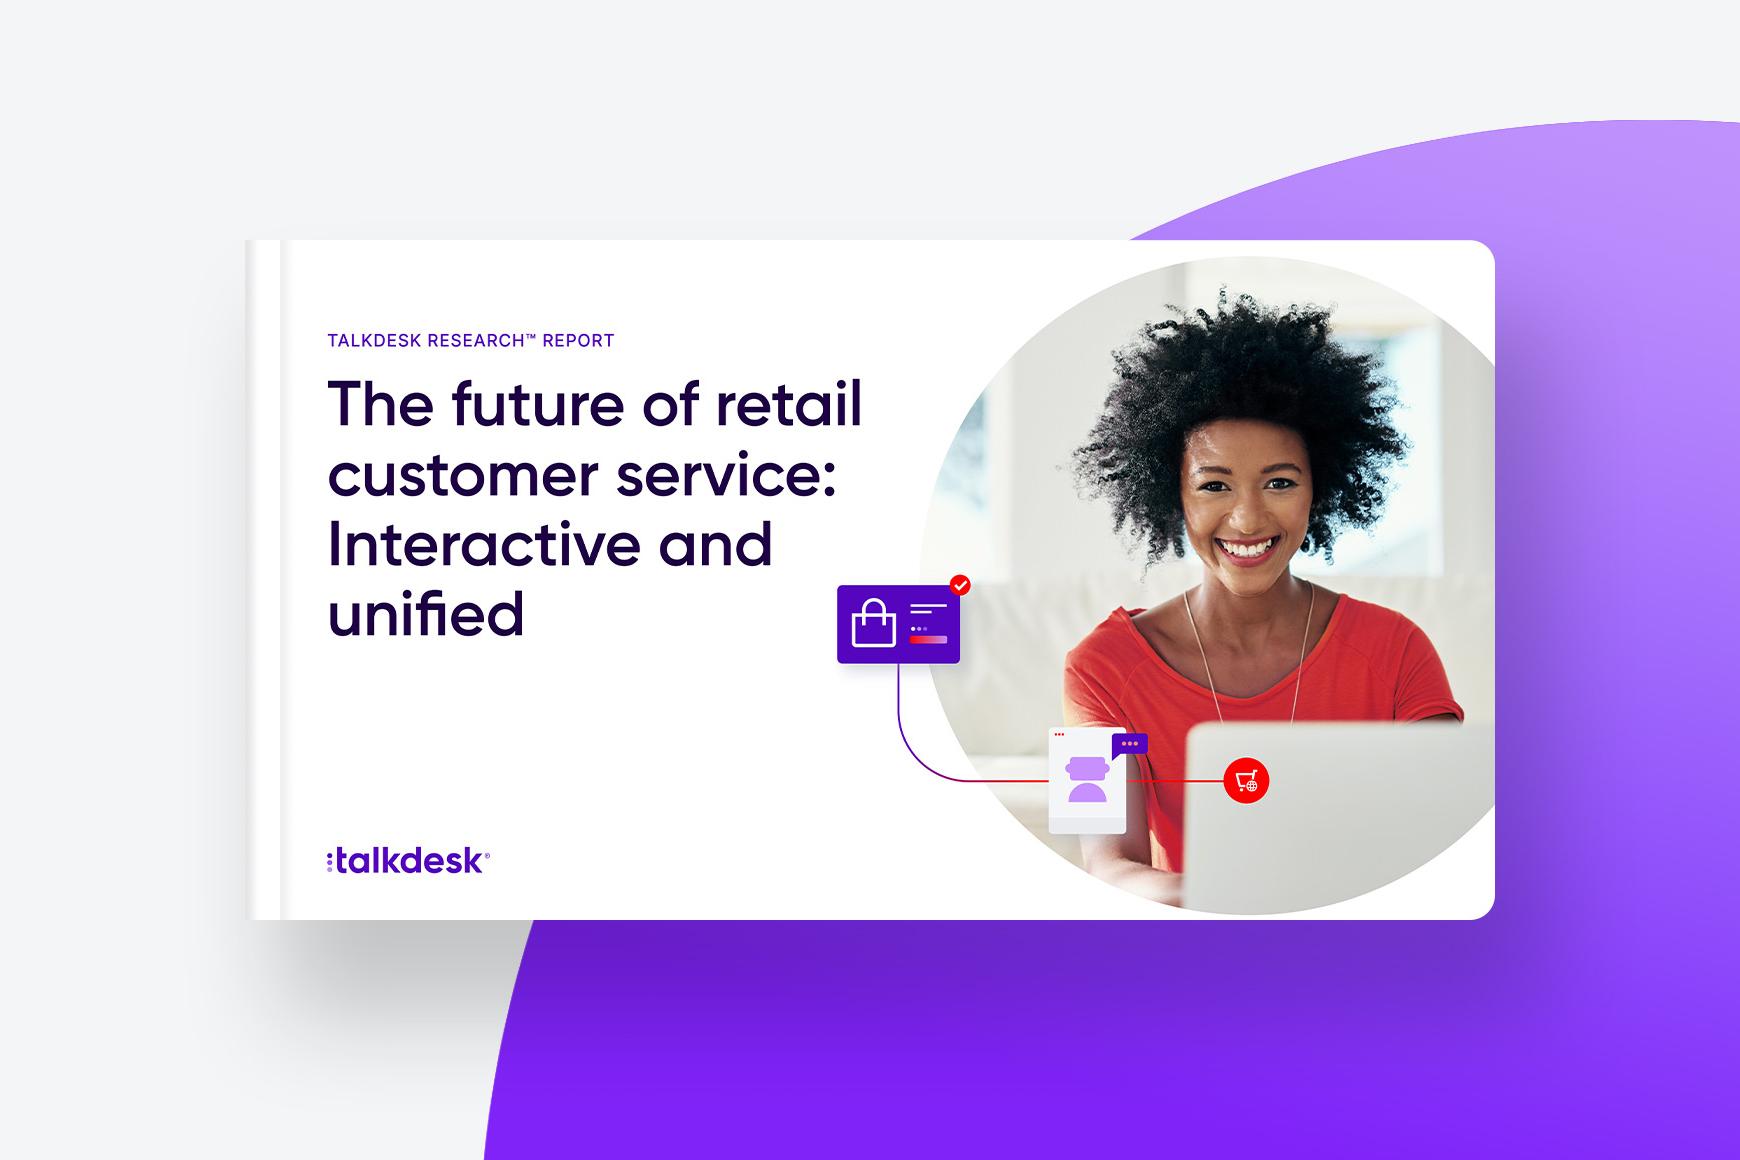 The future of retail customer service: Interactive and unified